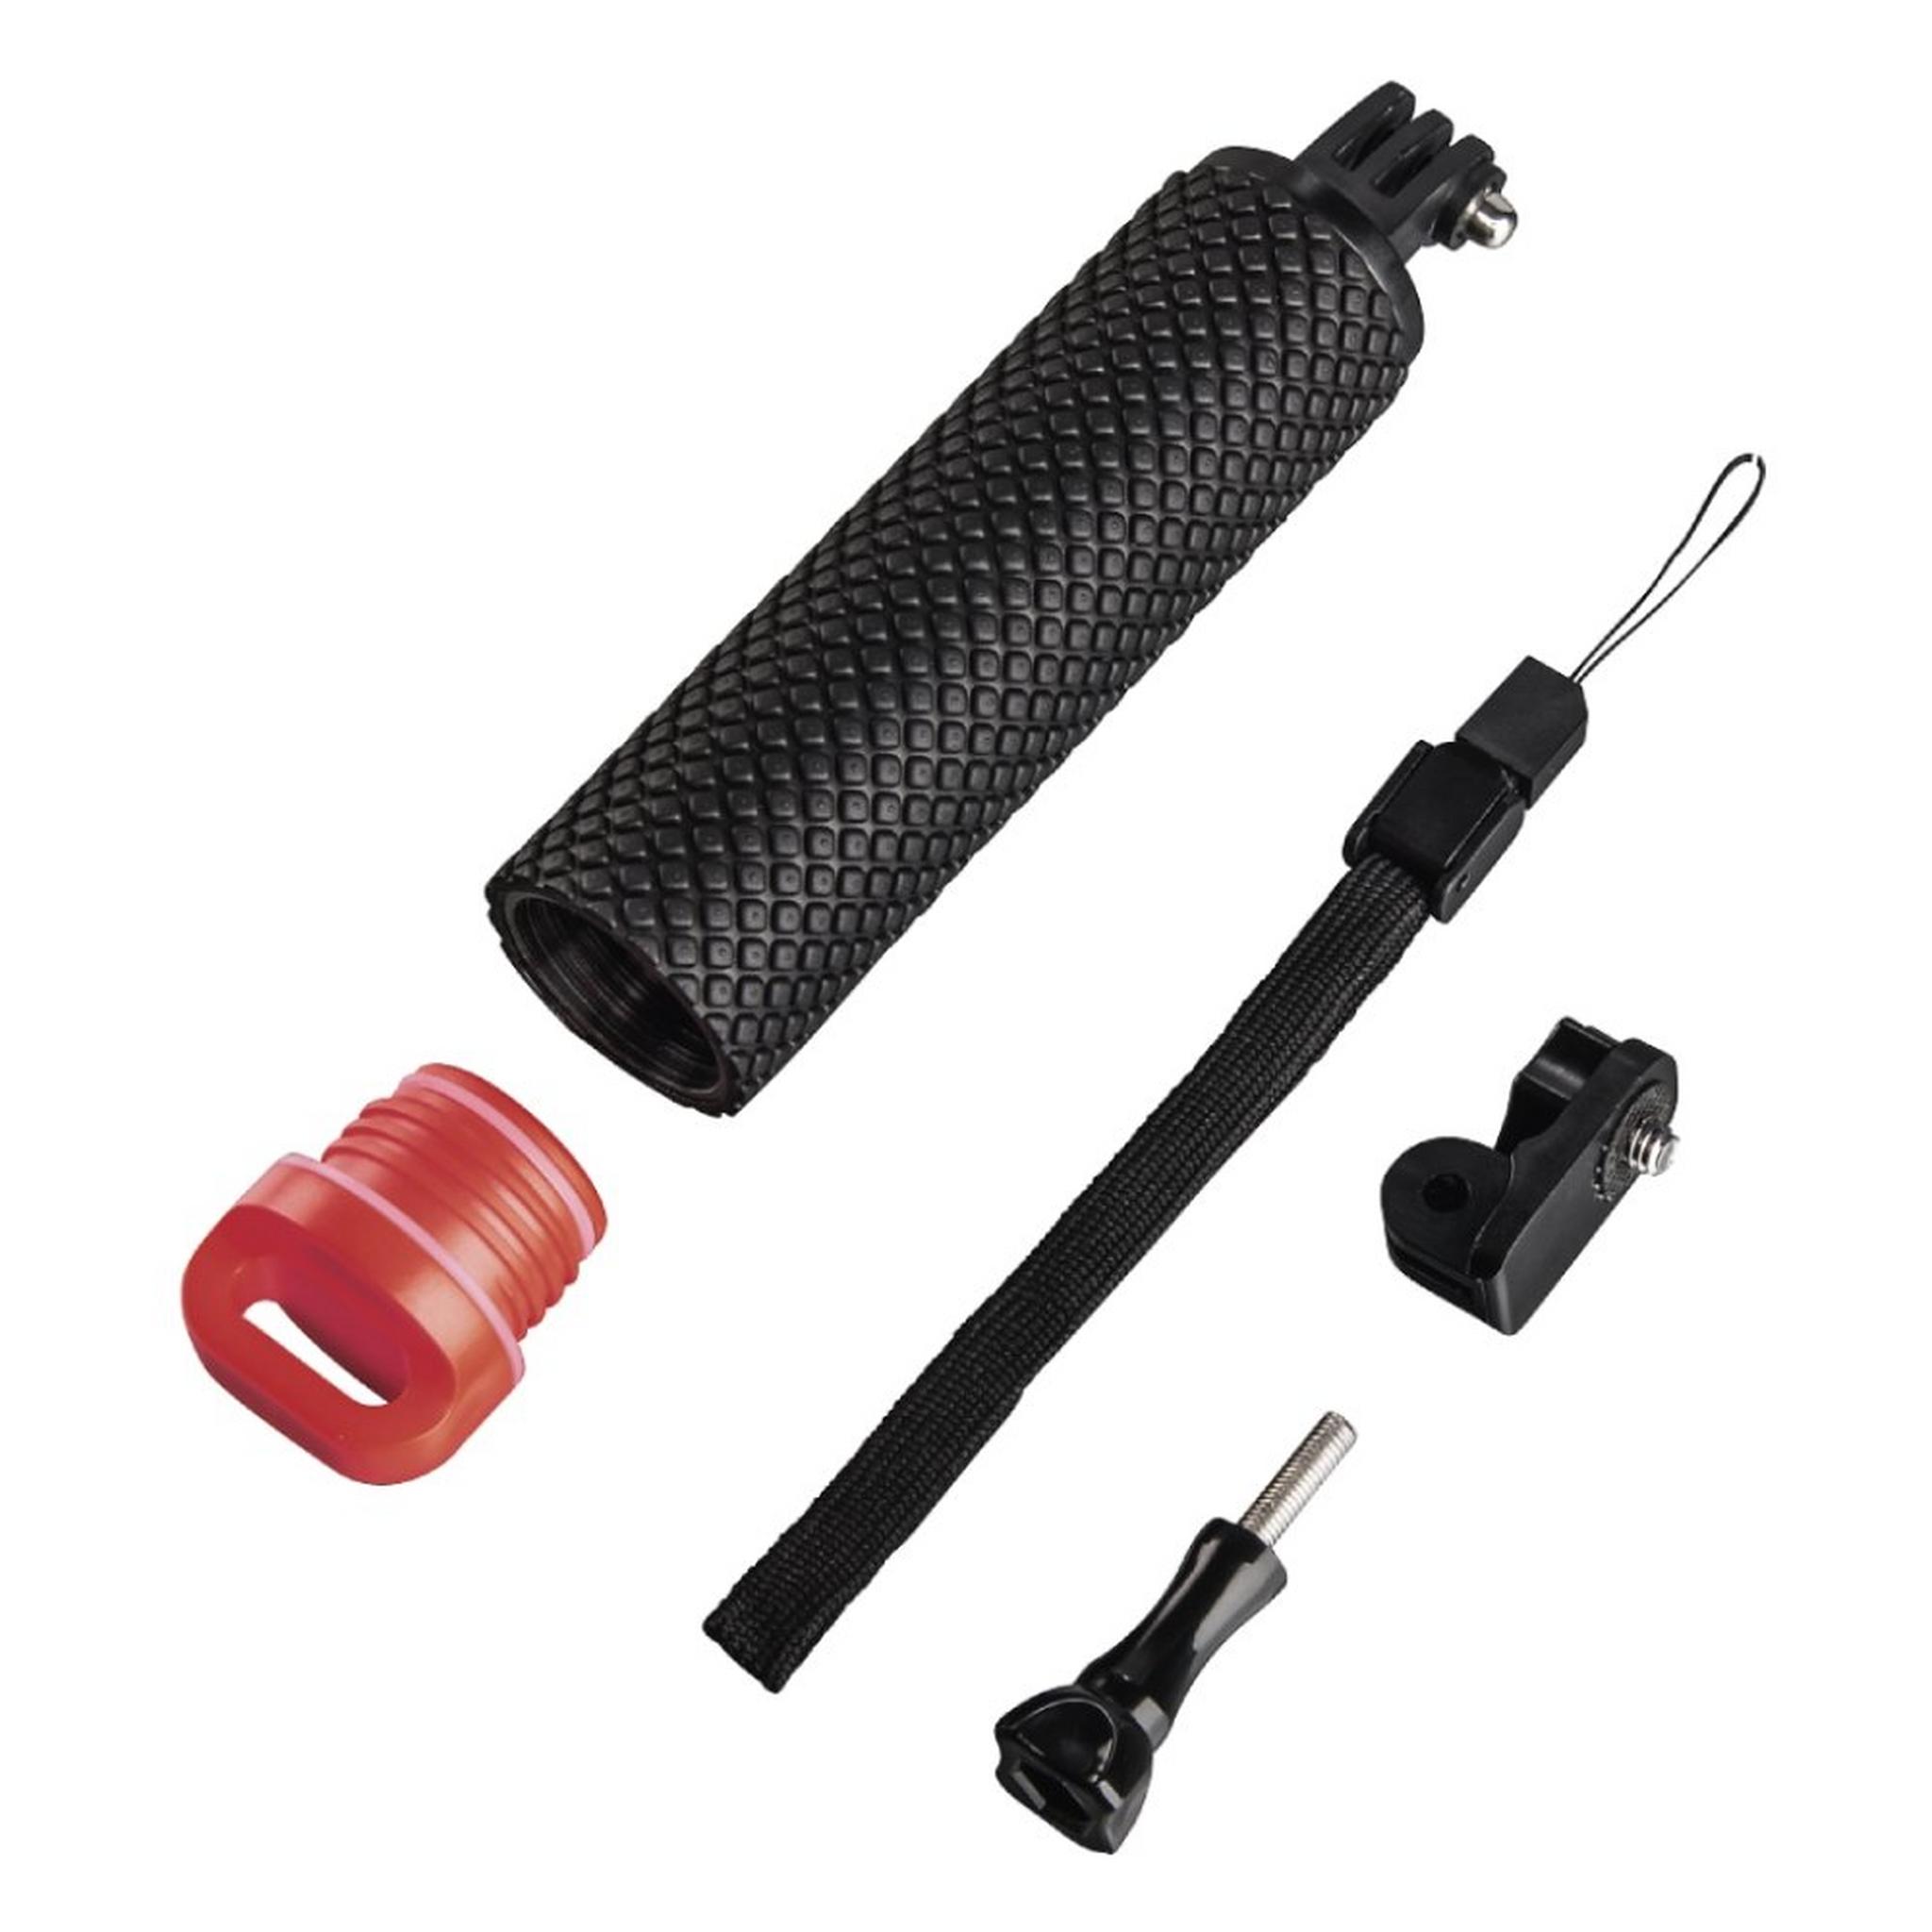 Hama 2 in 1 Floaty Action Camera Grip